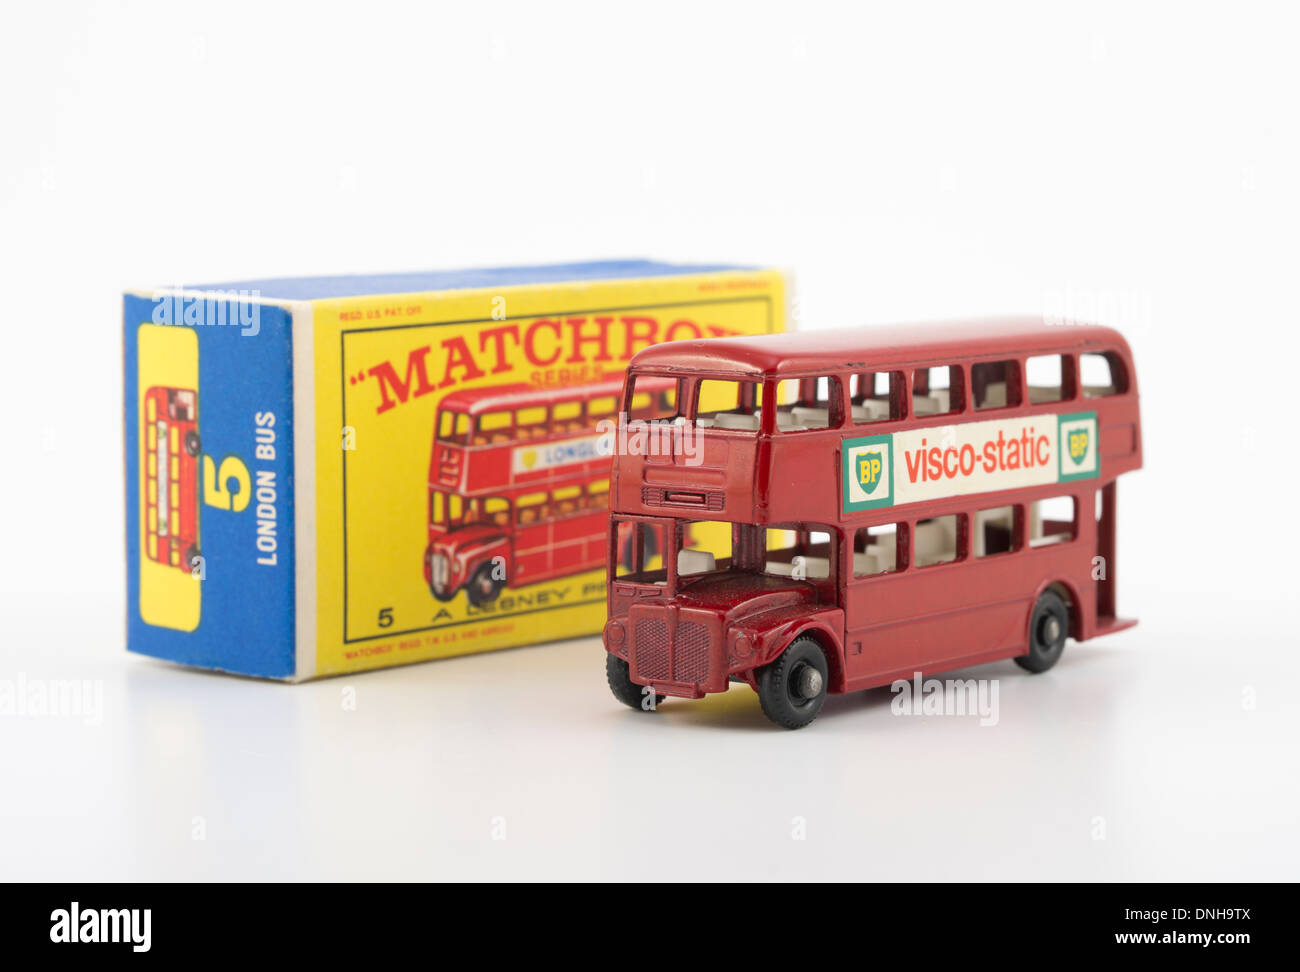 Matchbox Die-cast Toy Cars - #5 Routemaster Red Double Decker Bus Produced by Lesney Products United Kingdom from 1953 onwards. Stock Photo